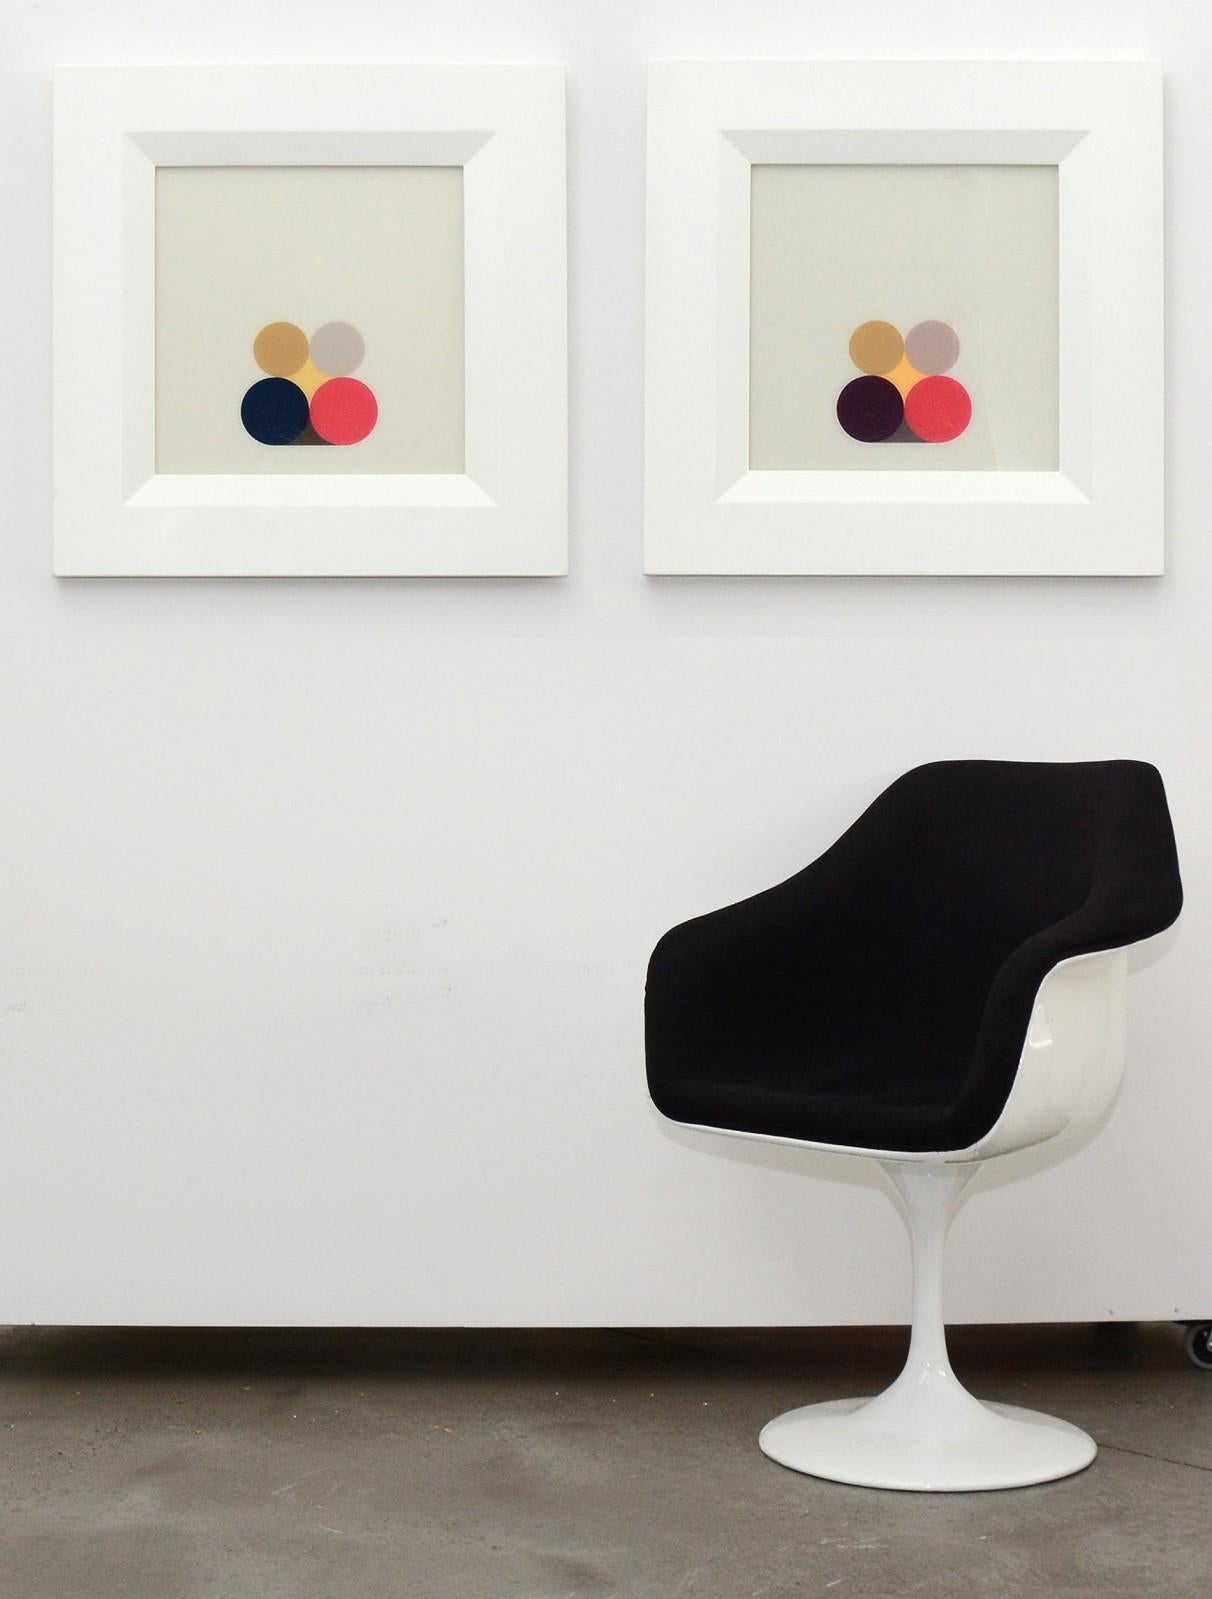 Four precisely configured and stacked circles form a contemplative pyramid at the foot of a square neutral ground. The areas between the shapes in this minimalist still life acrylic on plexiglass are filled with cream and maroon. Cantine's work is a